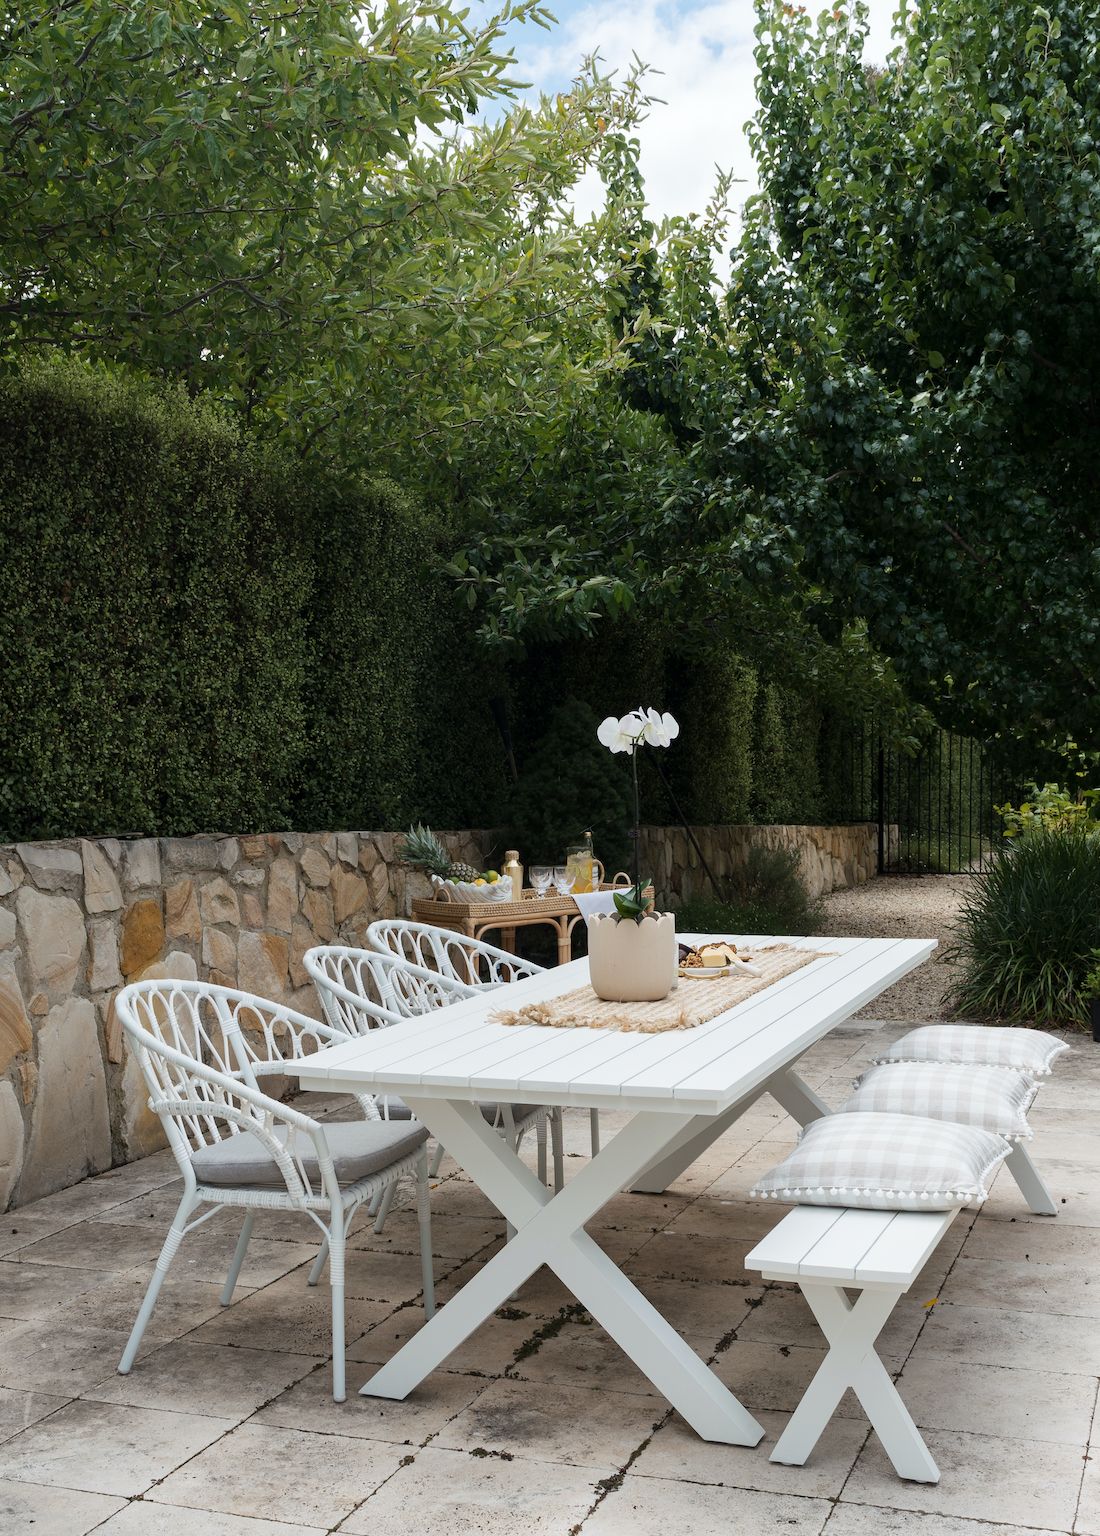 Enhance Your Outdoor Dining Experience with Stylish Furniture